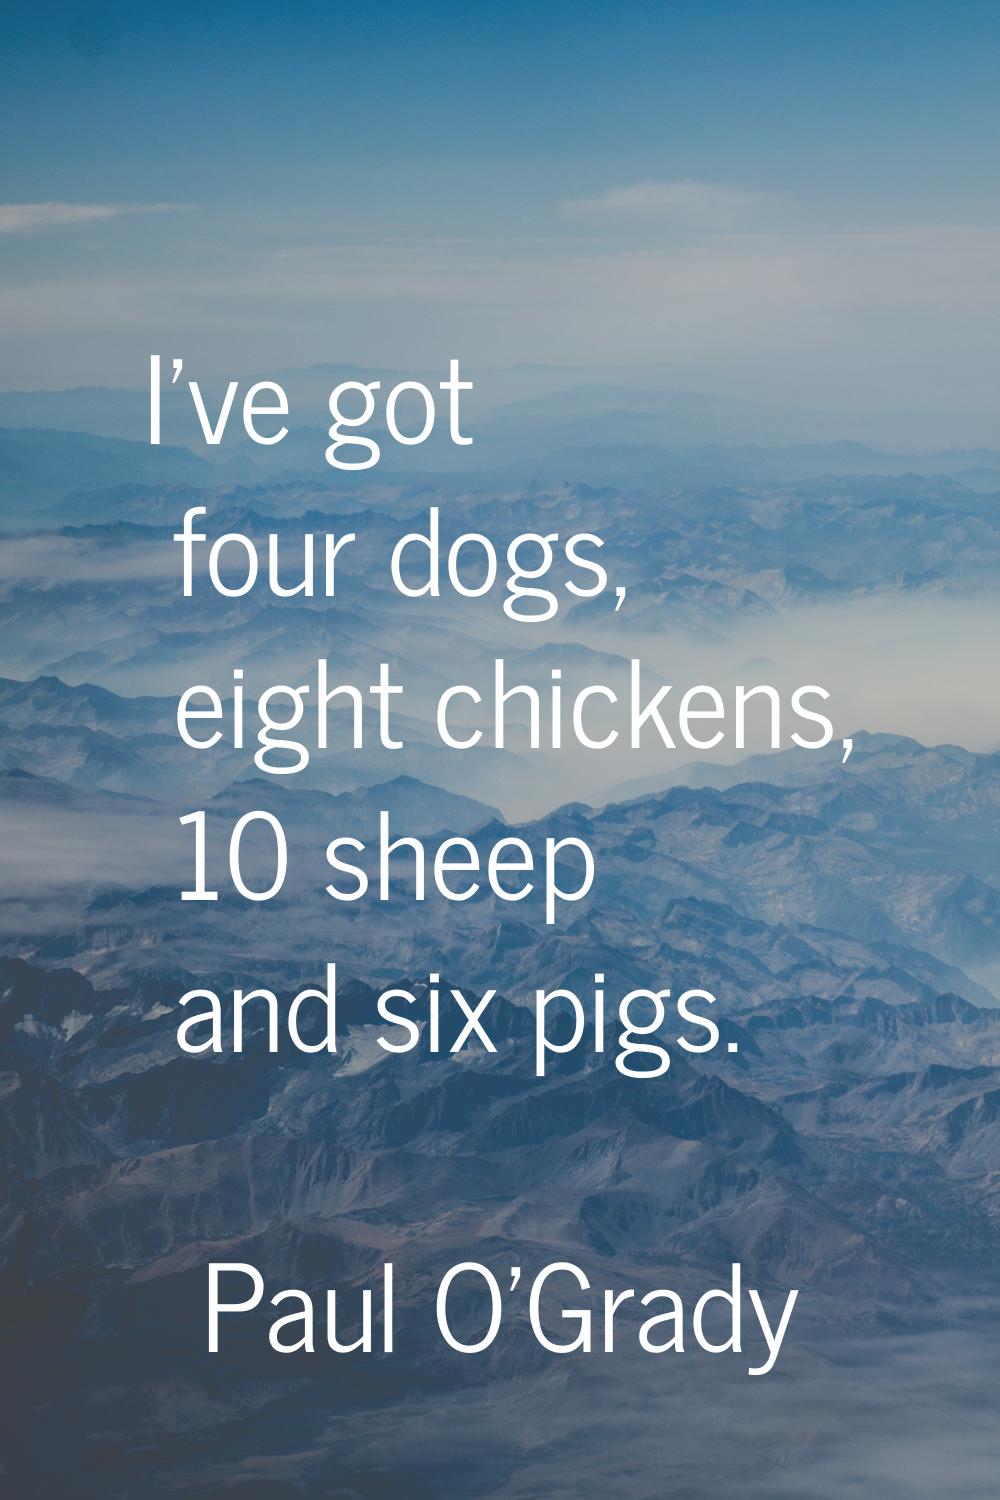 I've got four dogs, eight chickens, 10 sheep and six pigs.